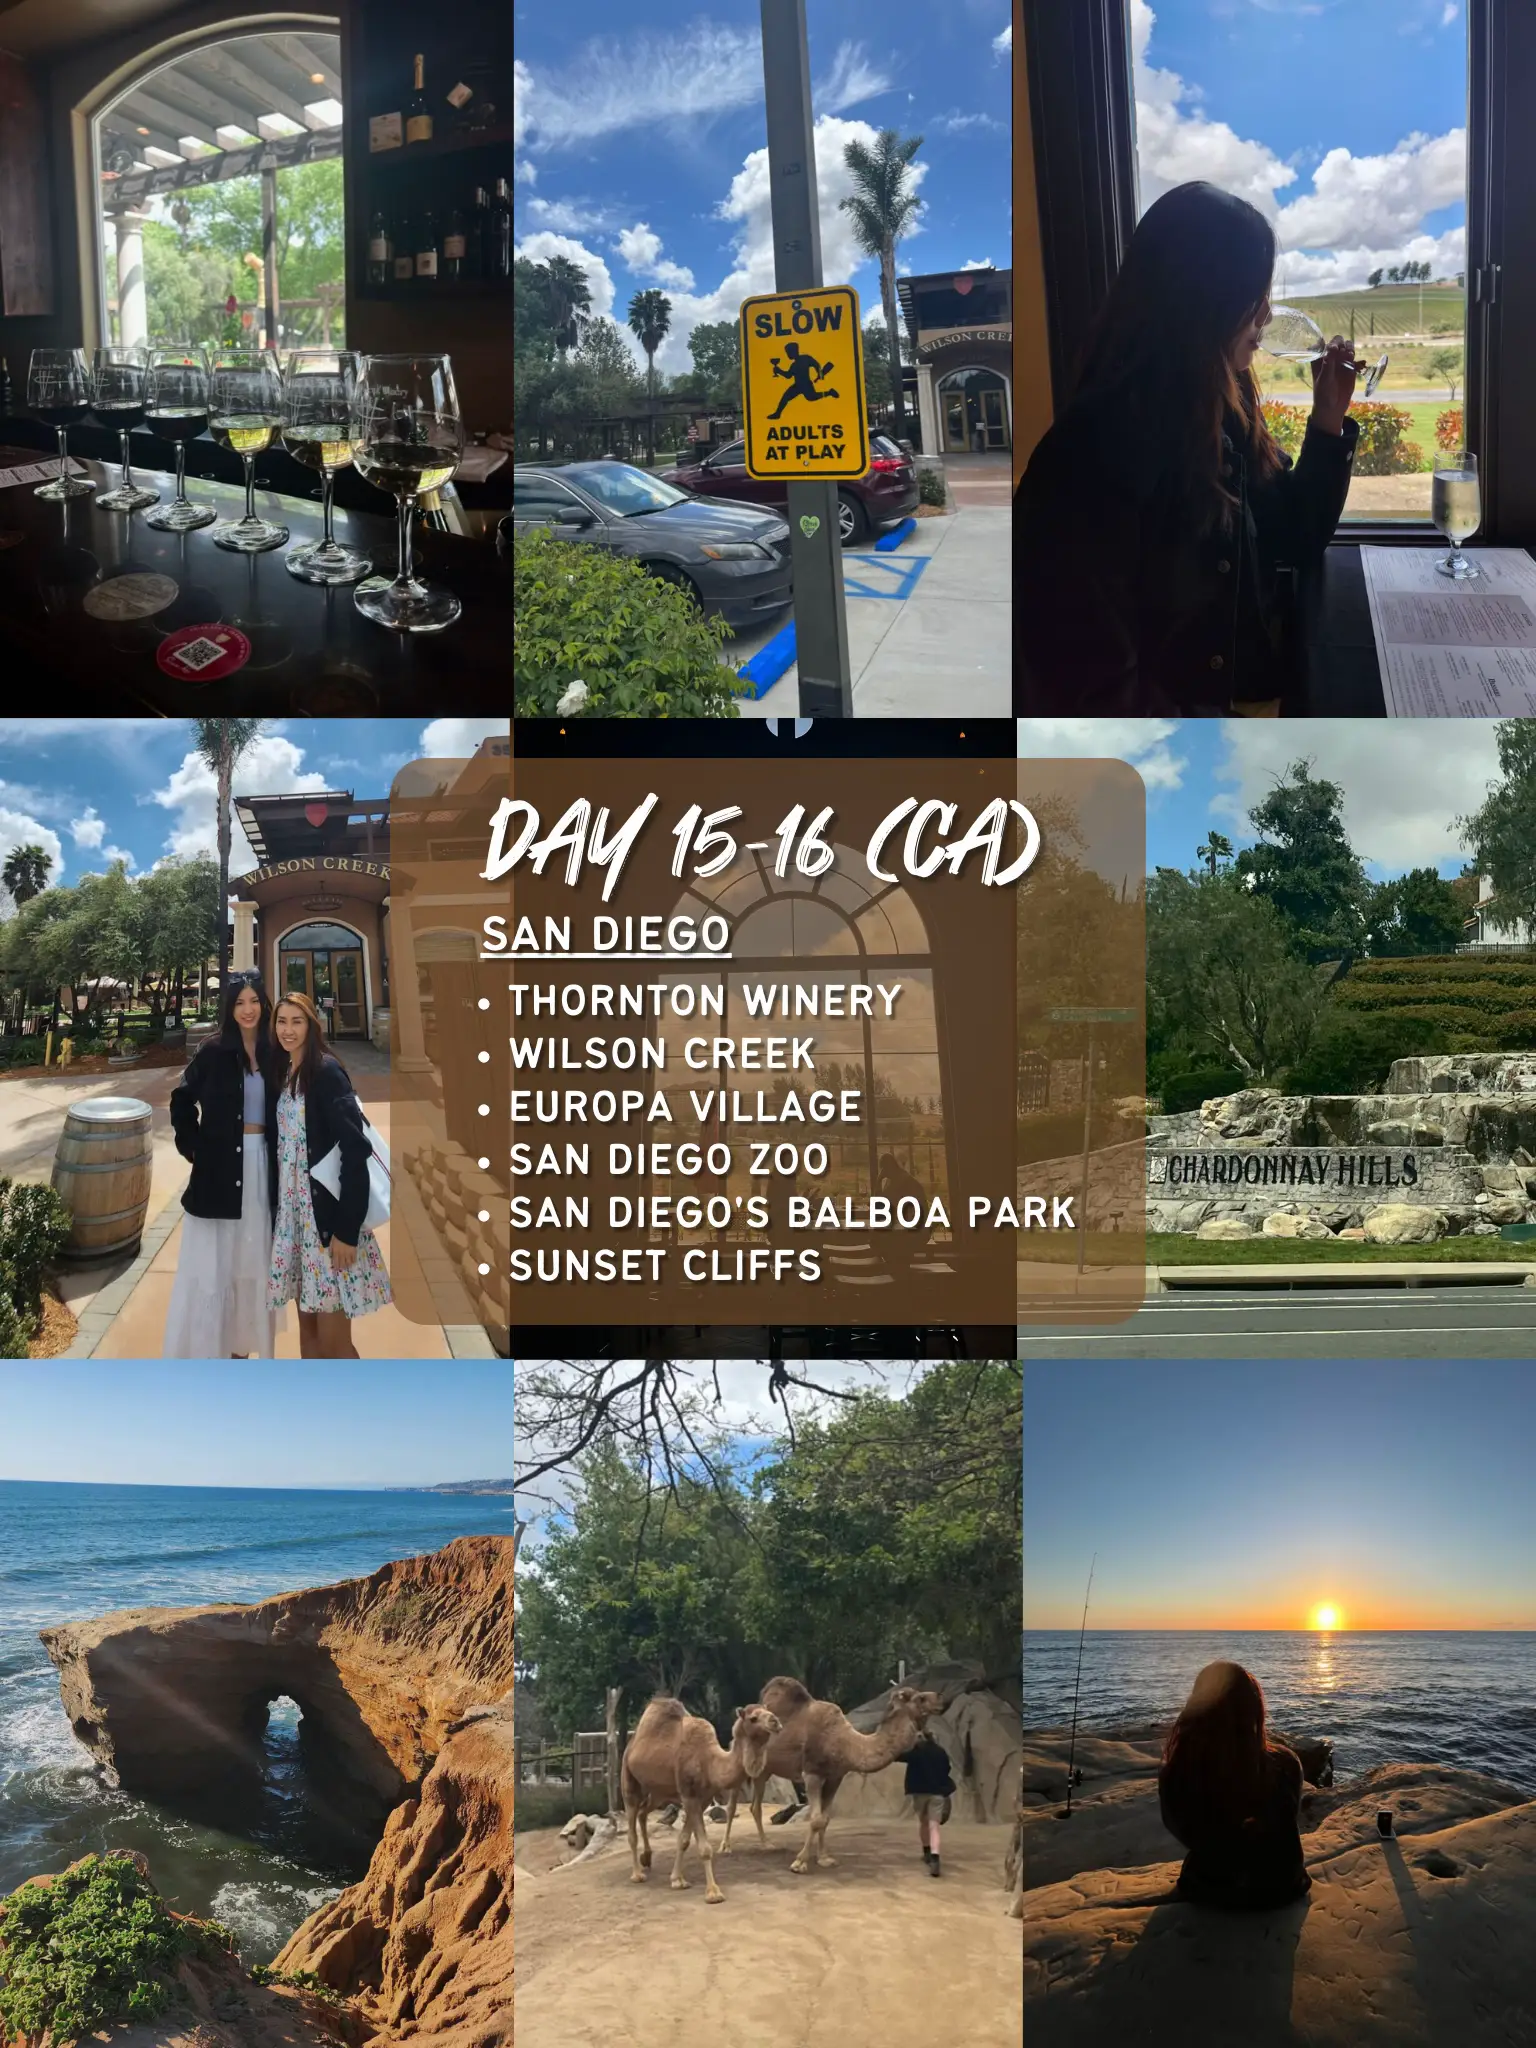 11 Cities, 3 States In 18 Days | 🇺🇸 FULL Itinerary 's images(7)